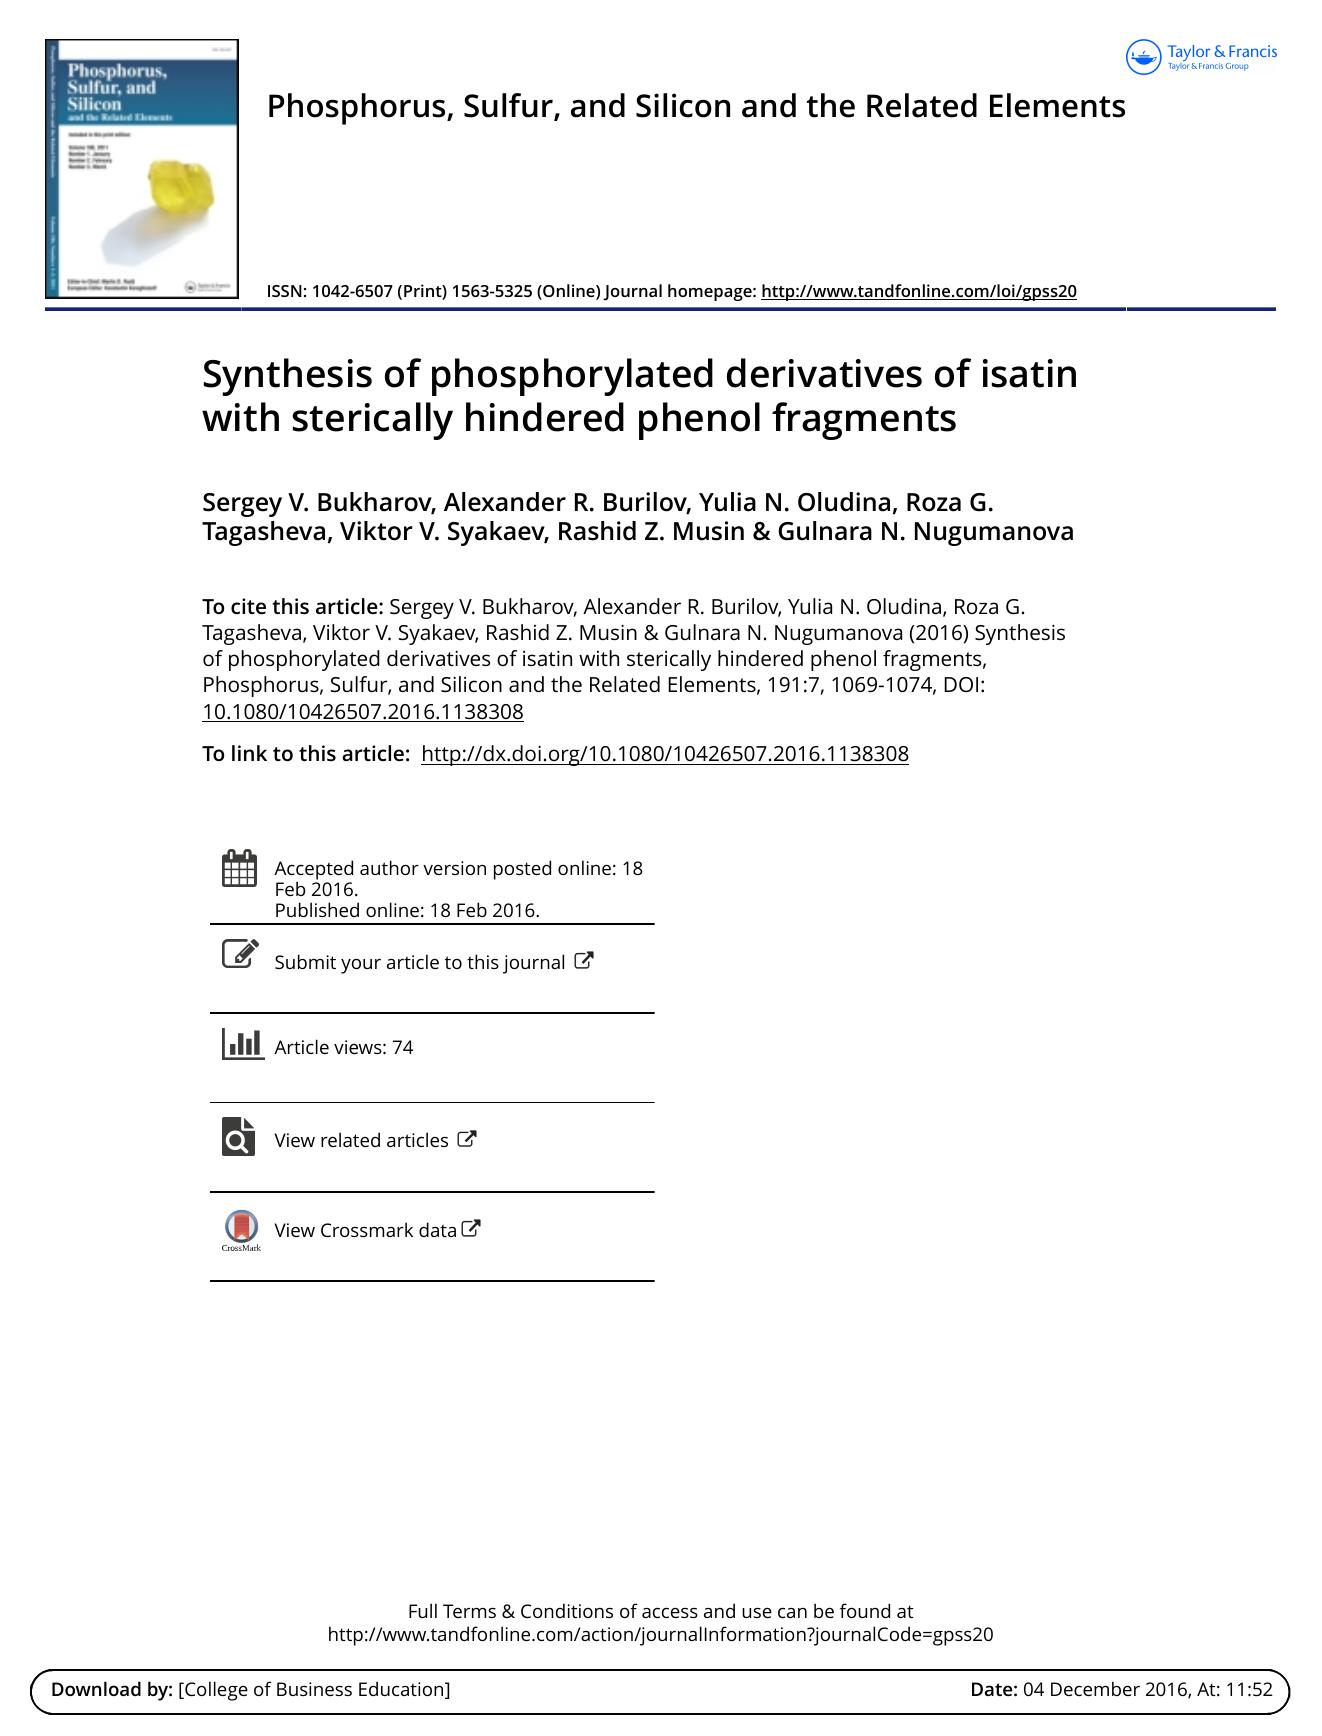 Synthesis of phosphorylated derivatives of isatin with sterically hindered phenol fragments by unknow